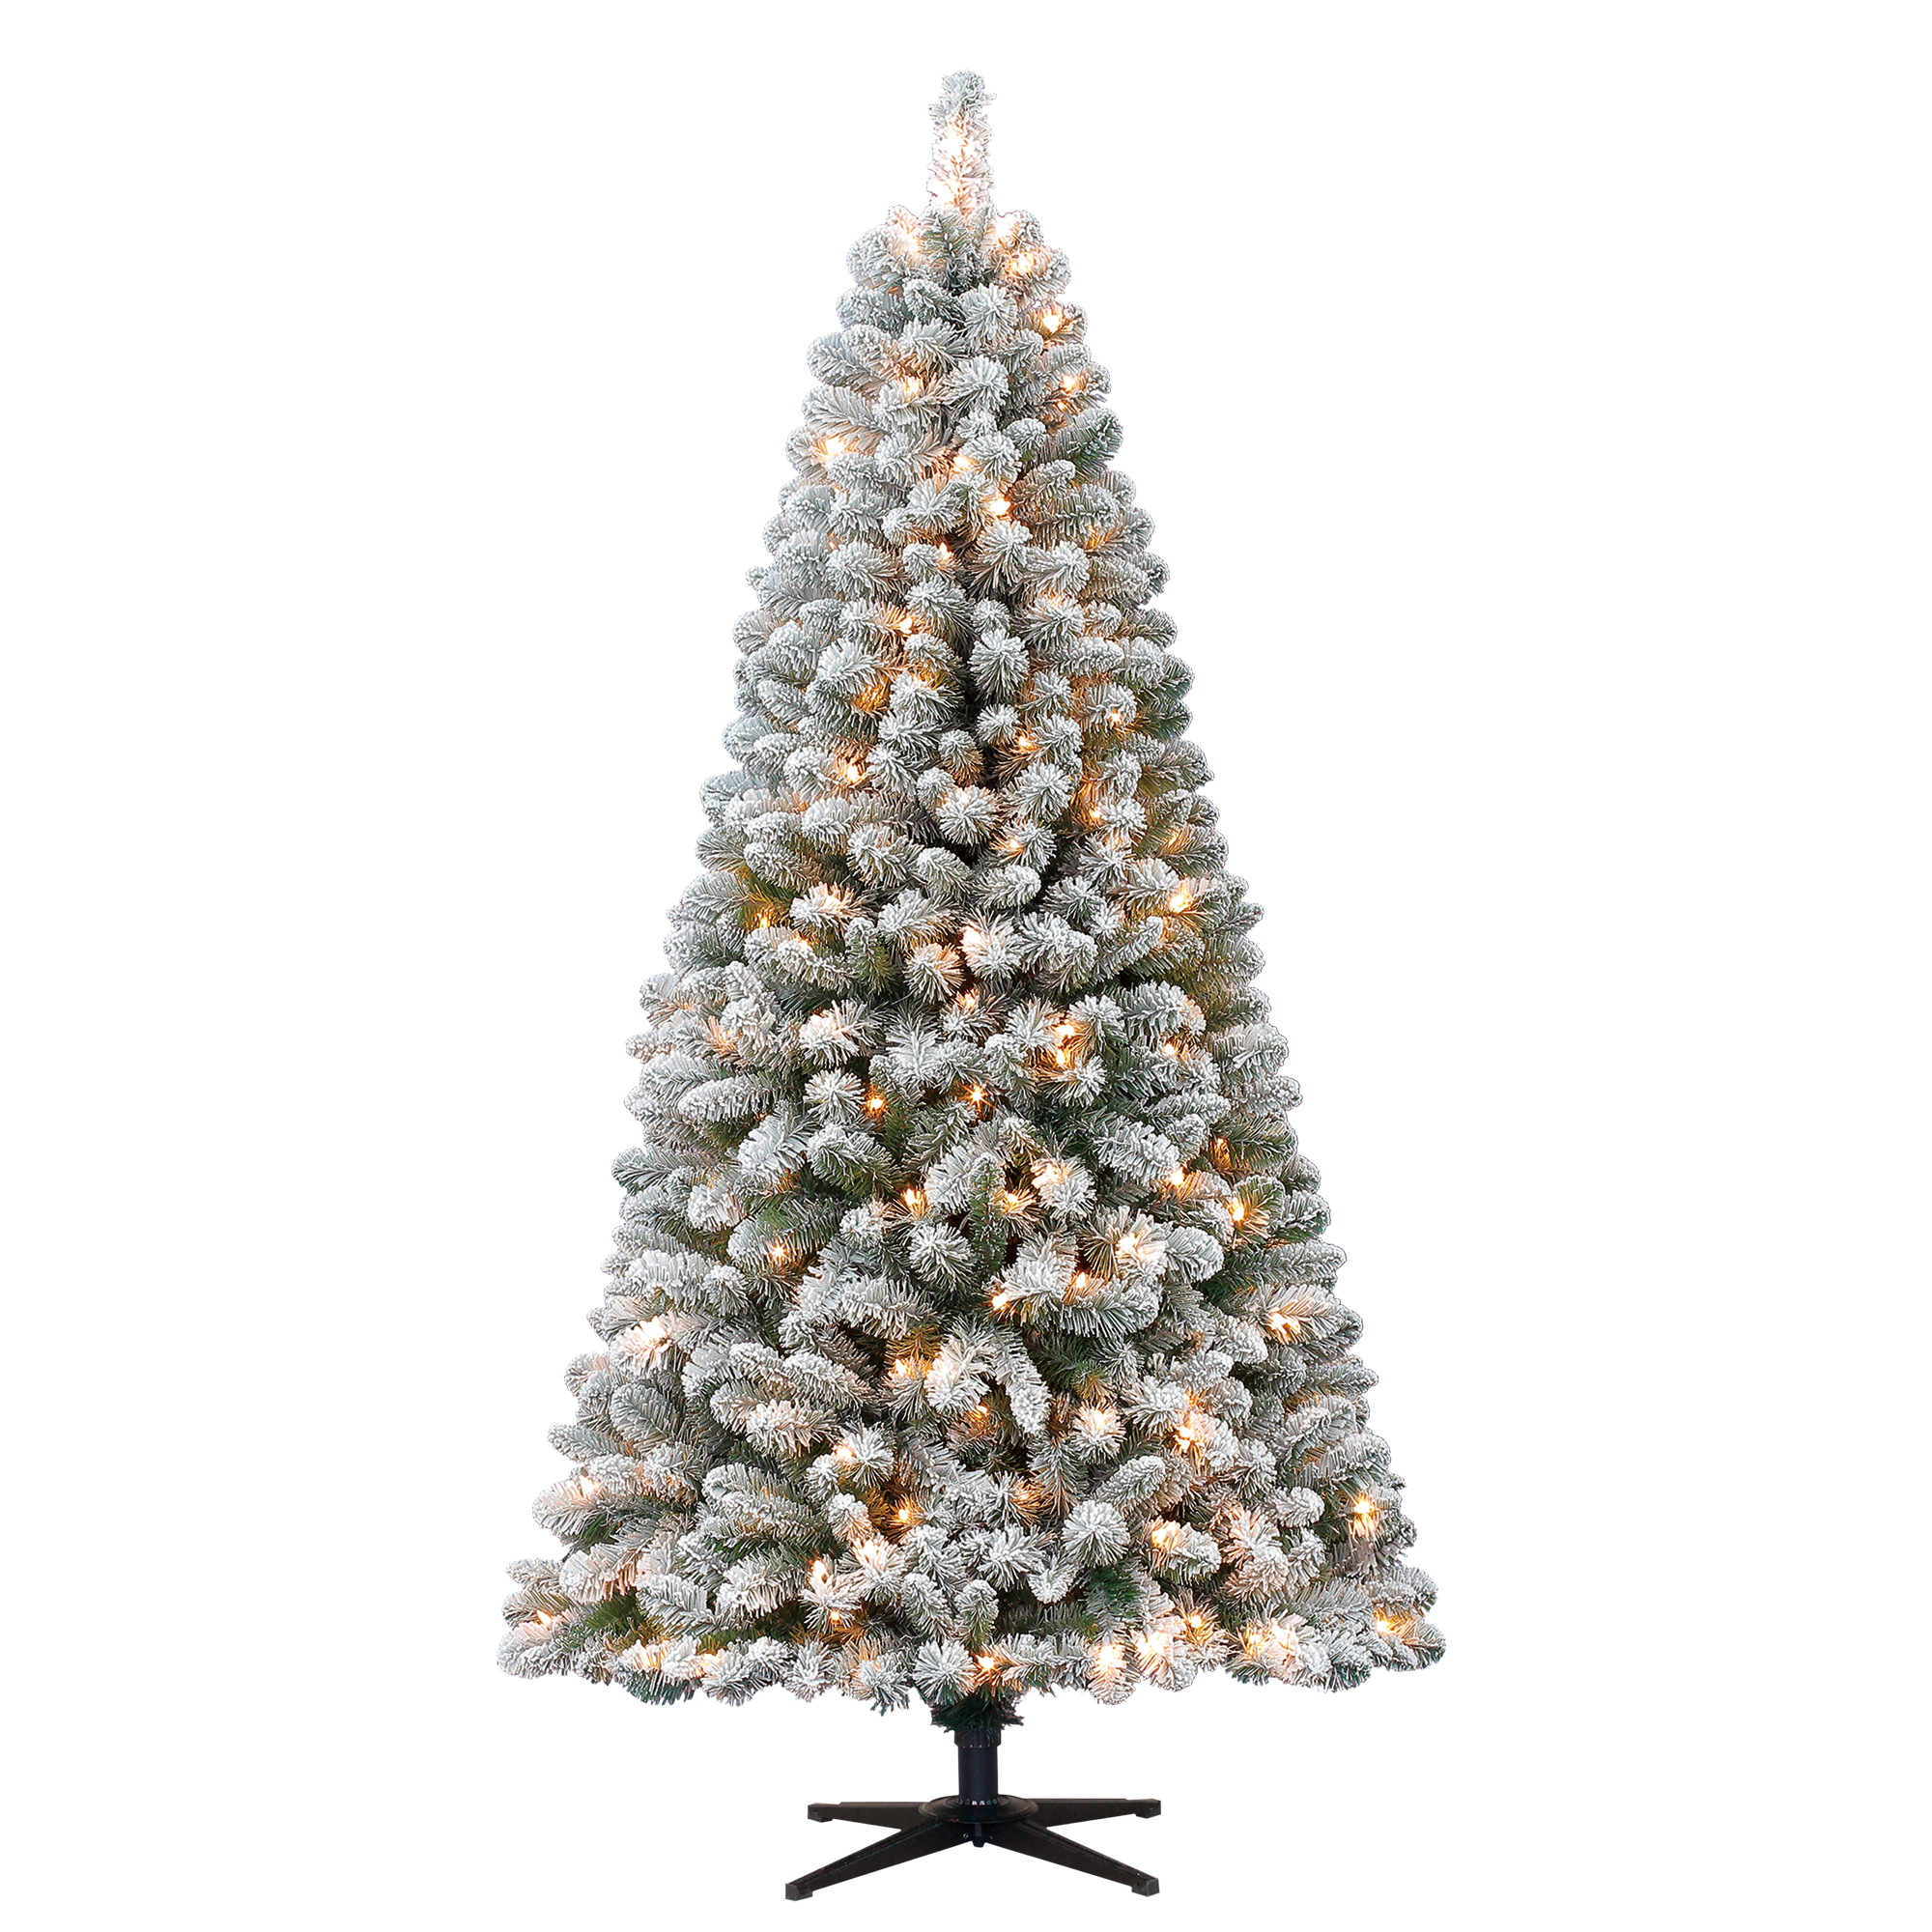 Holiday Time Flocked Pine Christmas Tree 6.5 ft, White on Green - image 1 of 4